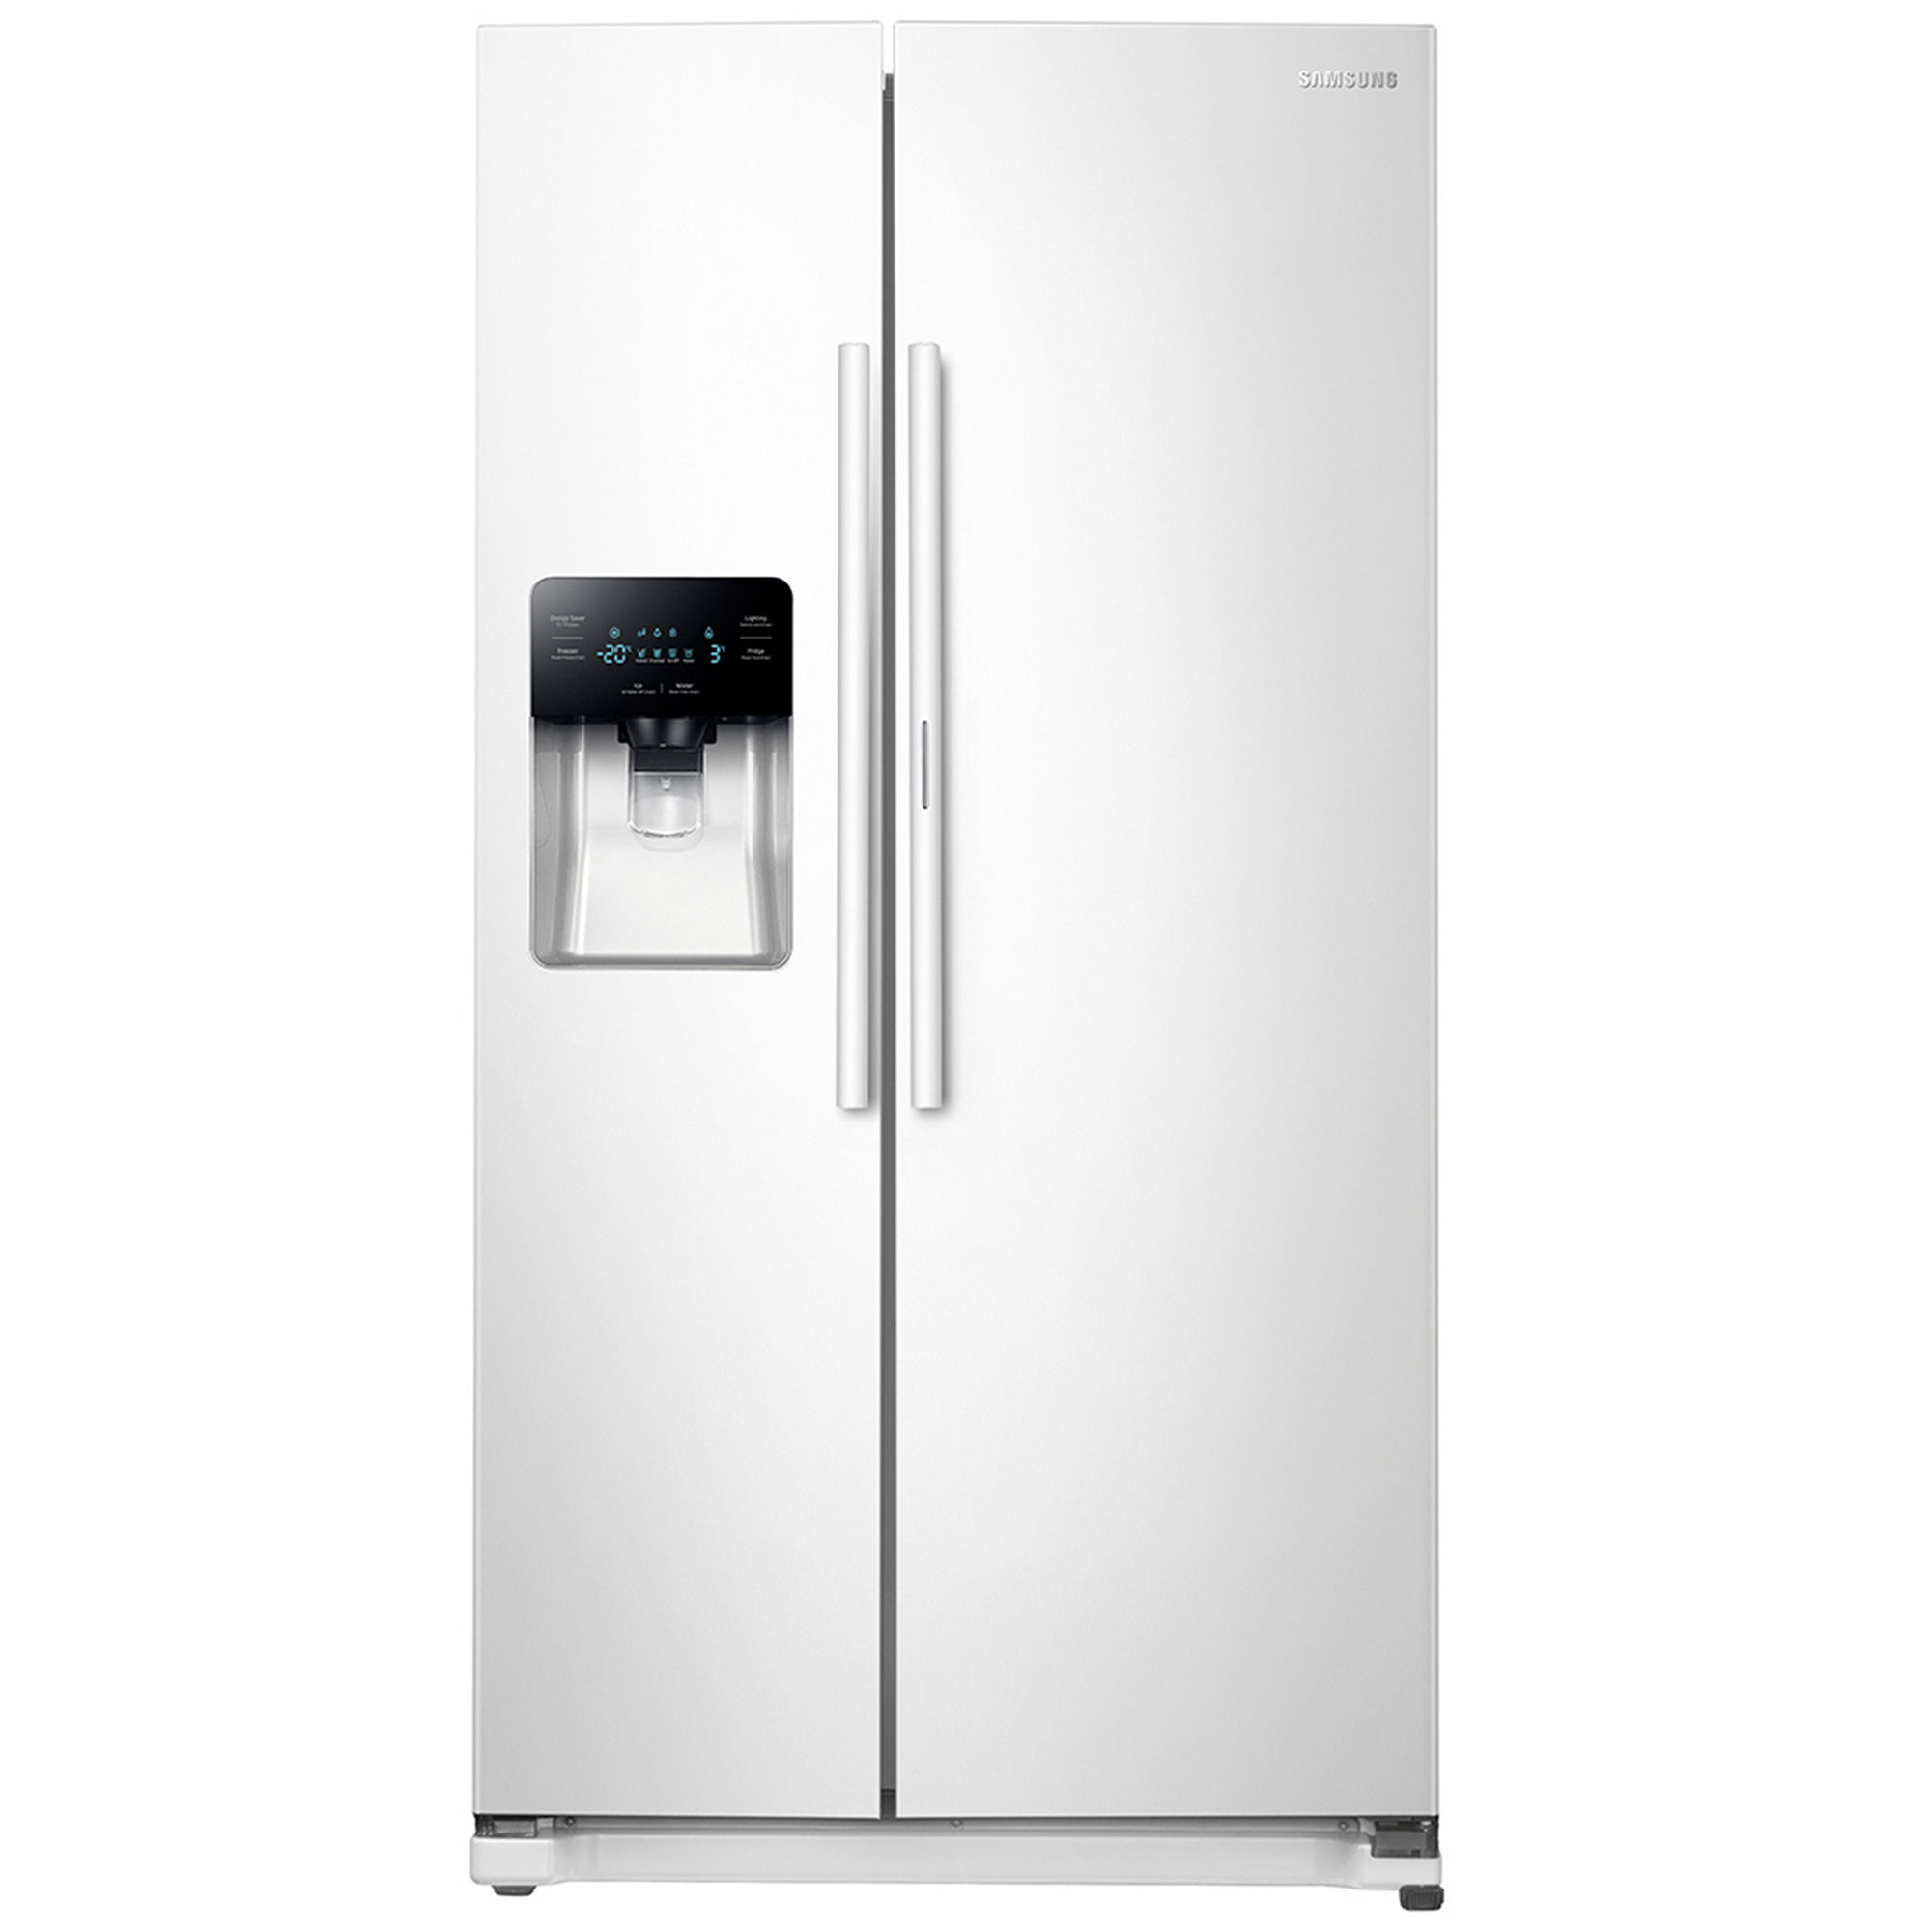 Samsung Energy Star 24.7 Cu. Ft. Side-by-side Refrigerator With Food Showcase Design